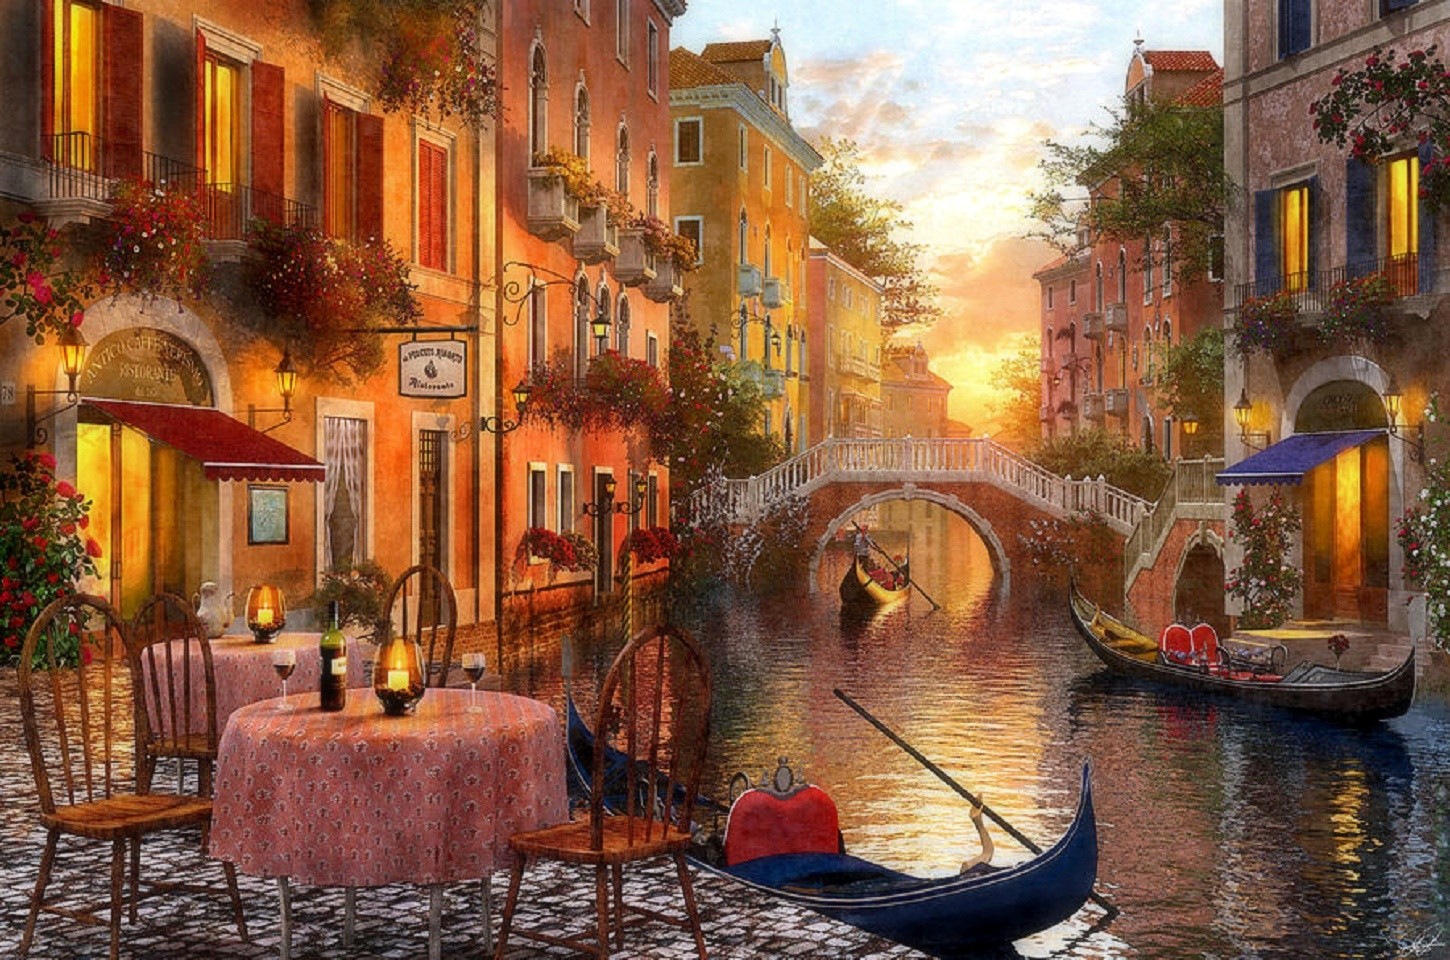 bridges-venetian-sunset-attractions-dreams-venice-sunsets-romantic-italy-bridges-boats-canals-architecture-houses-dinner-love-seasons-travels-background-pictures.jpg